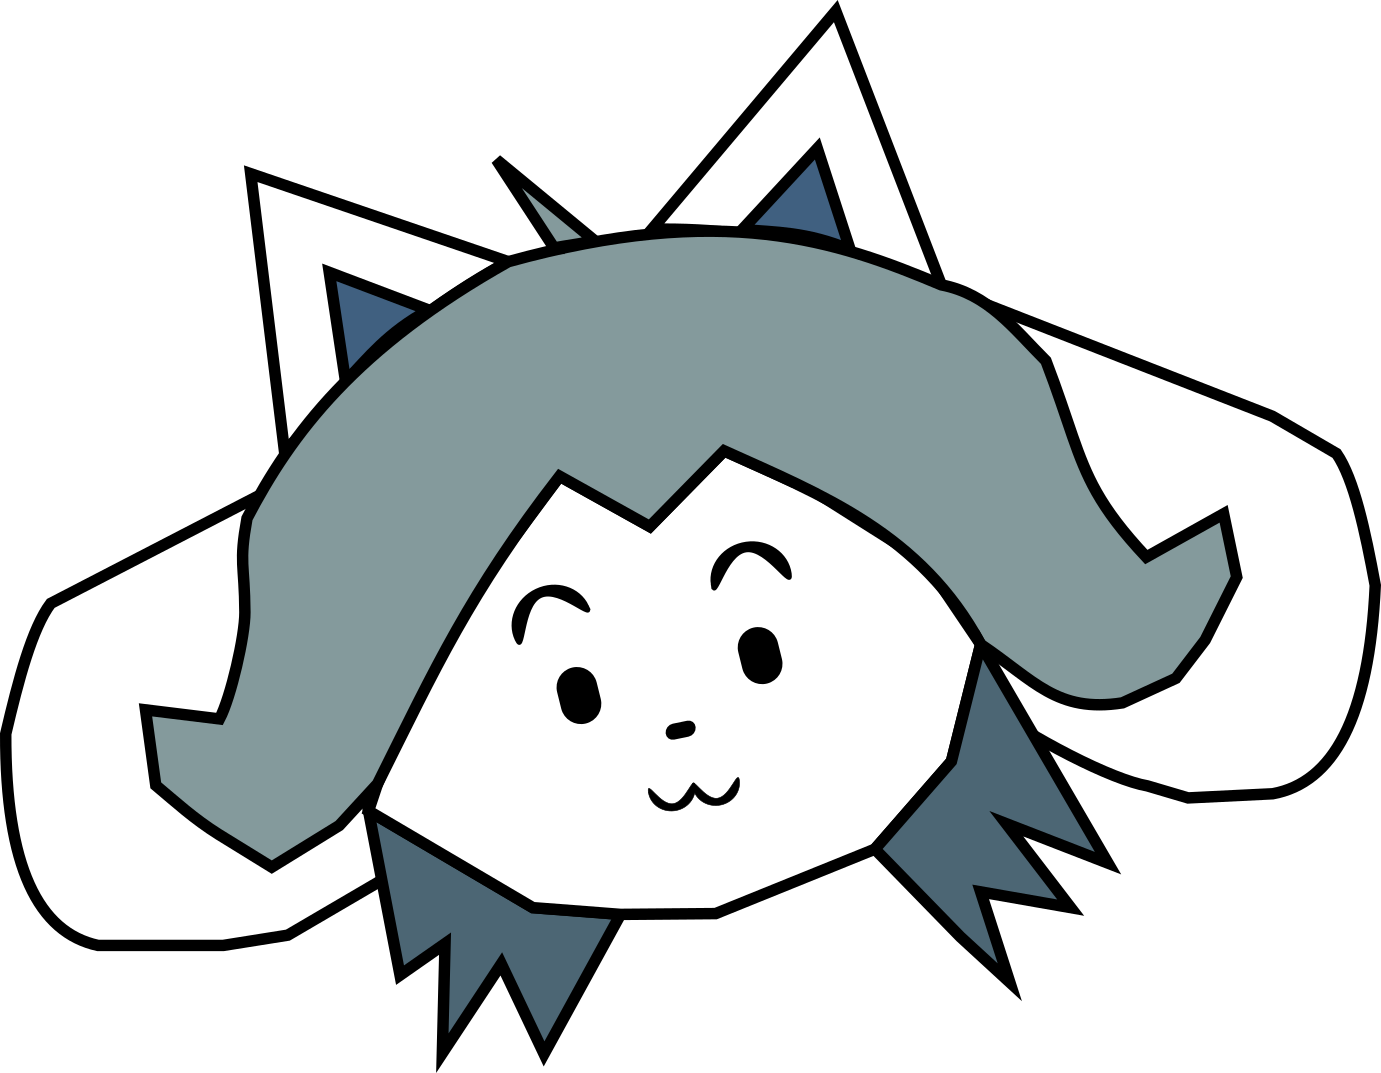 Temmie. Created in Inkscape.